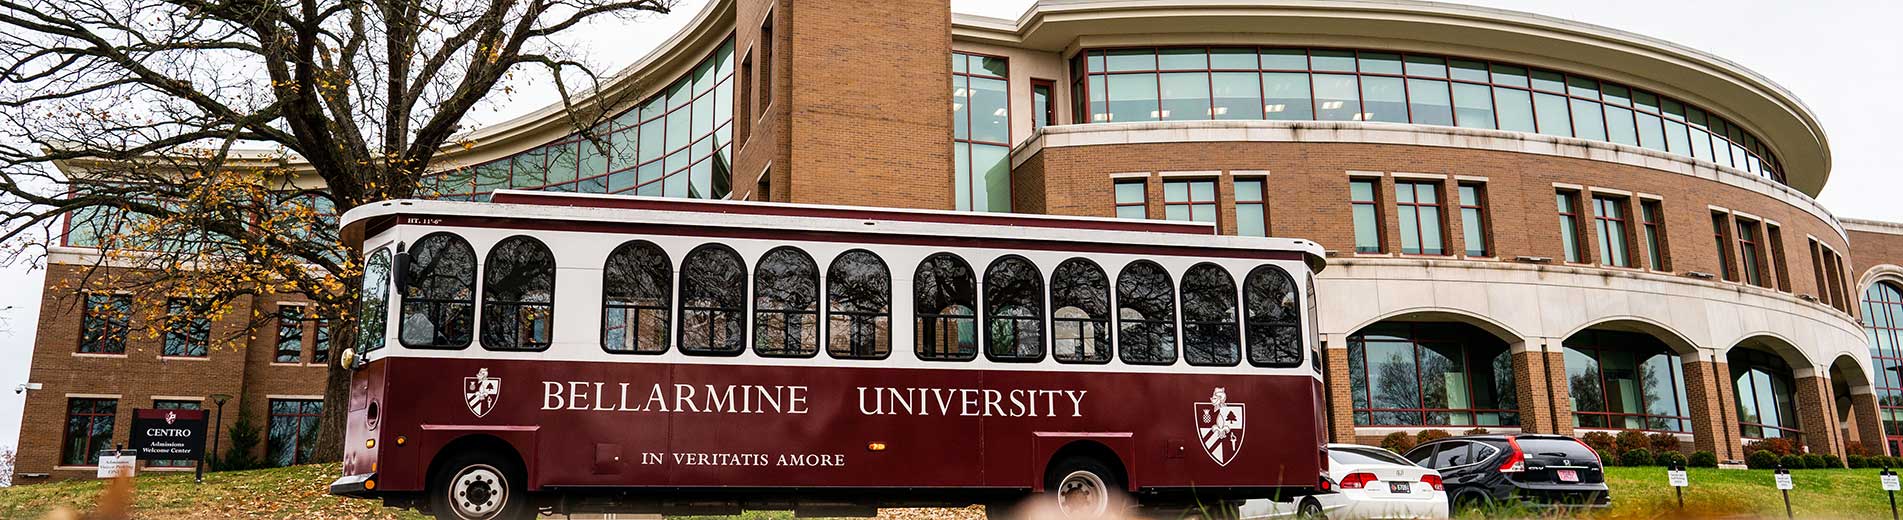 trolley outside the campus building